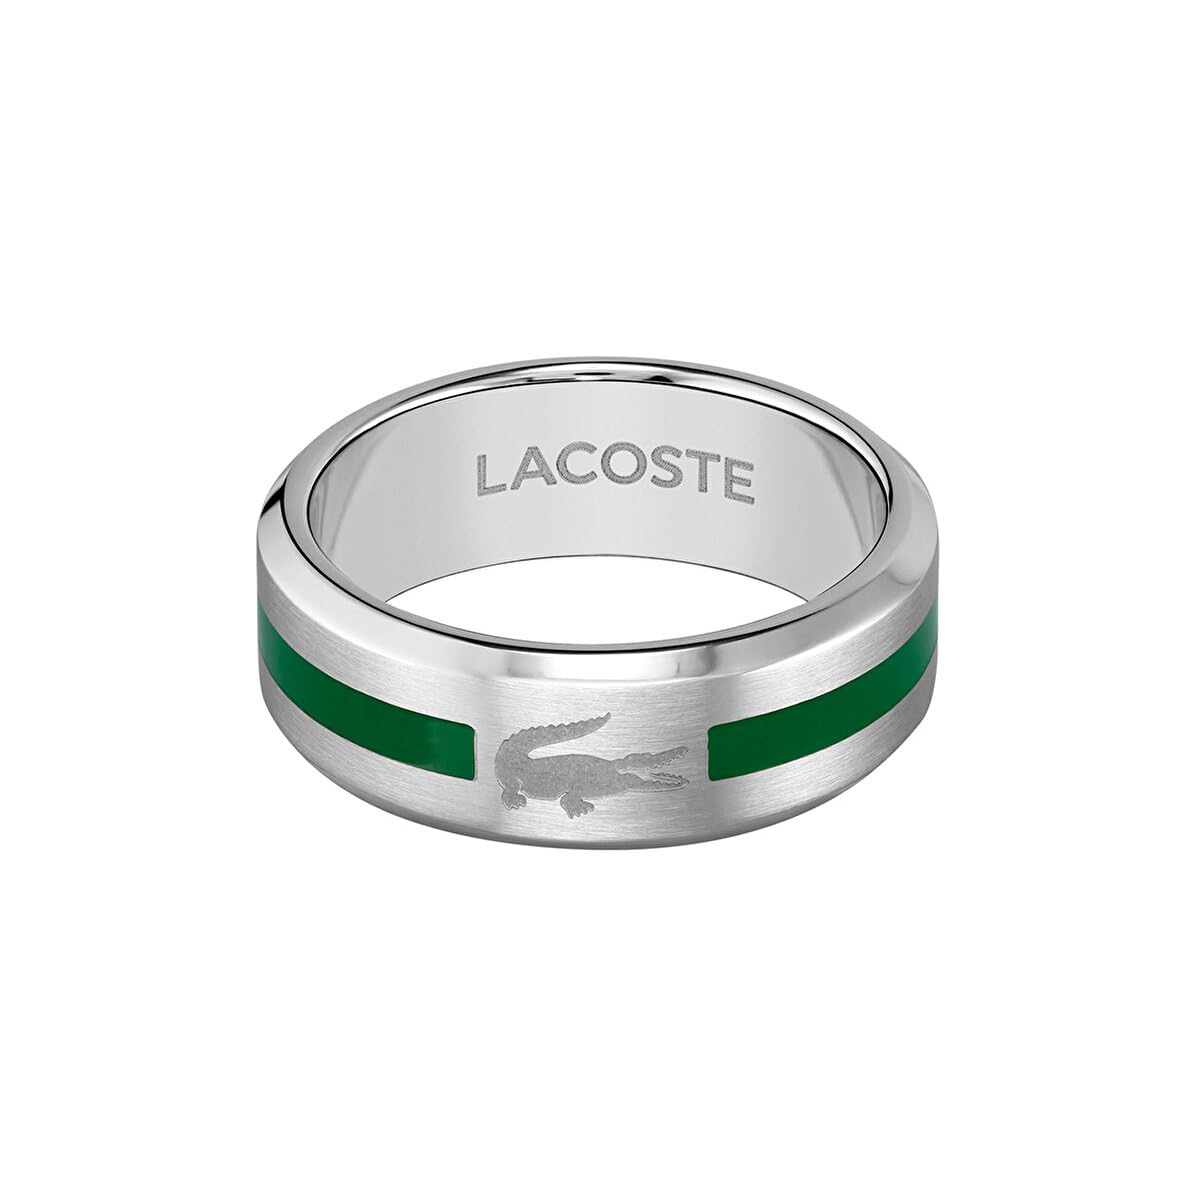 Lacoste Men's LACOSTE BASELINE Collection Ring - 2040083G